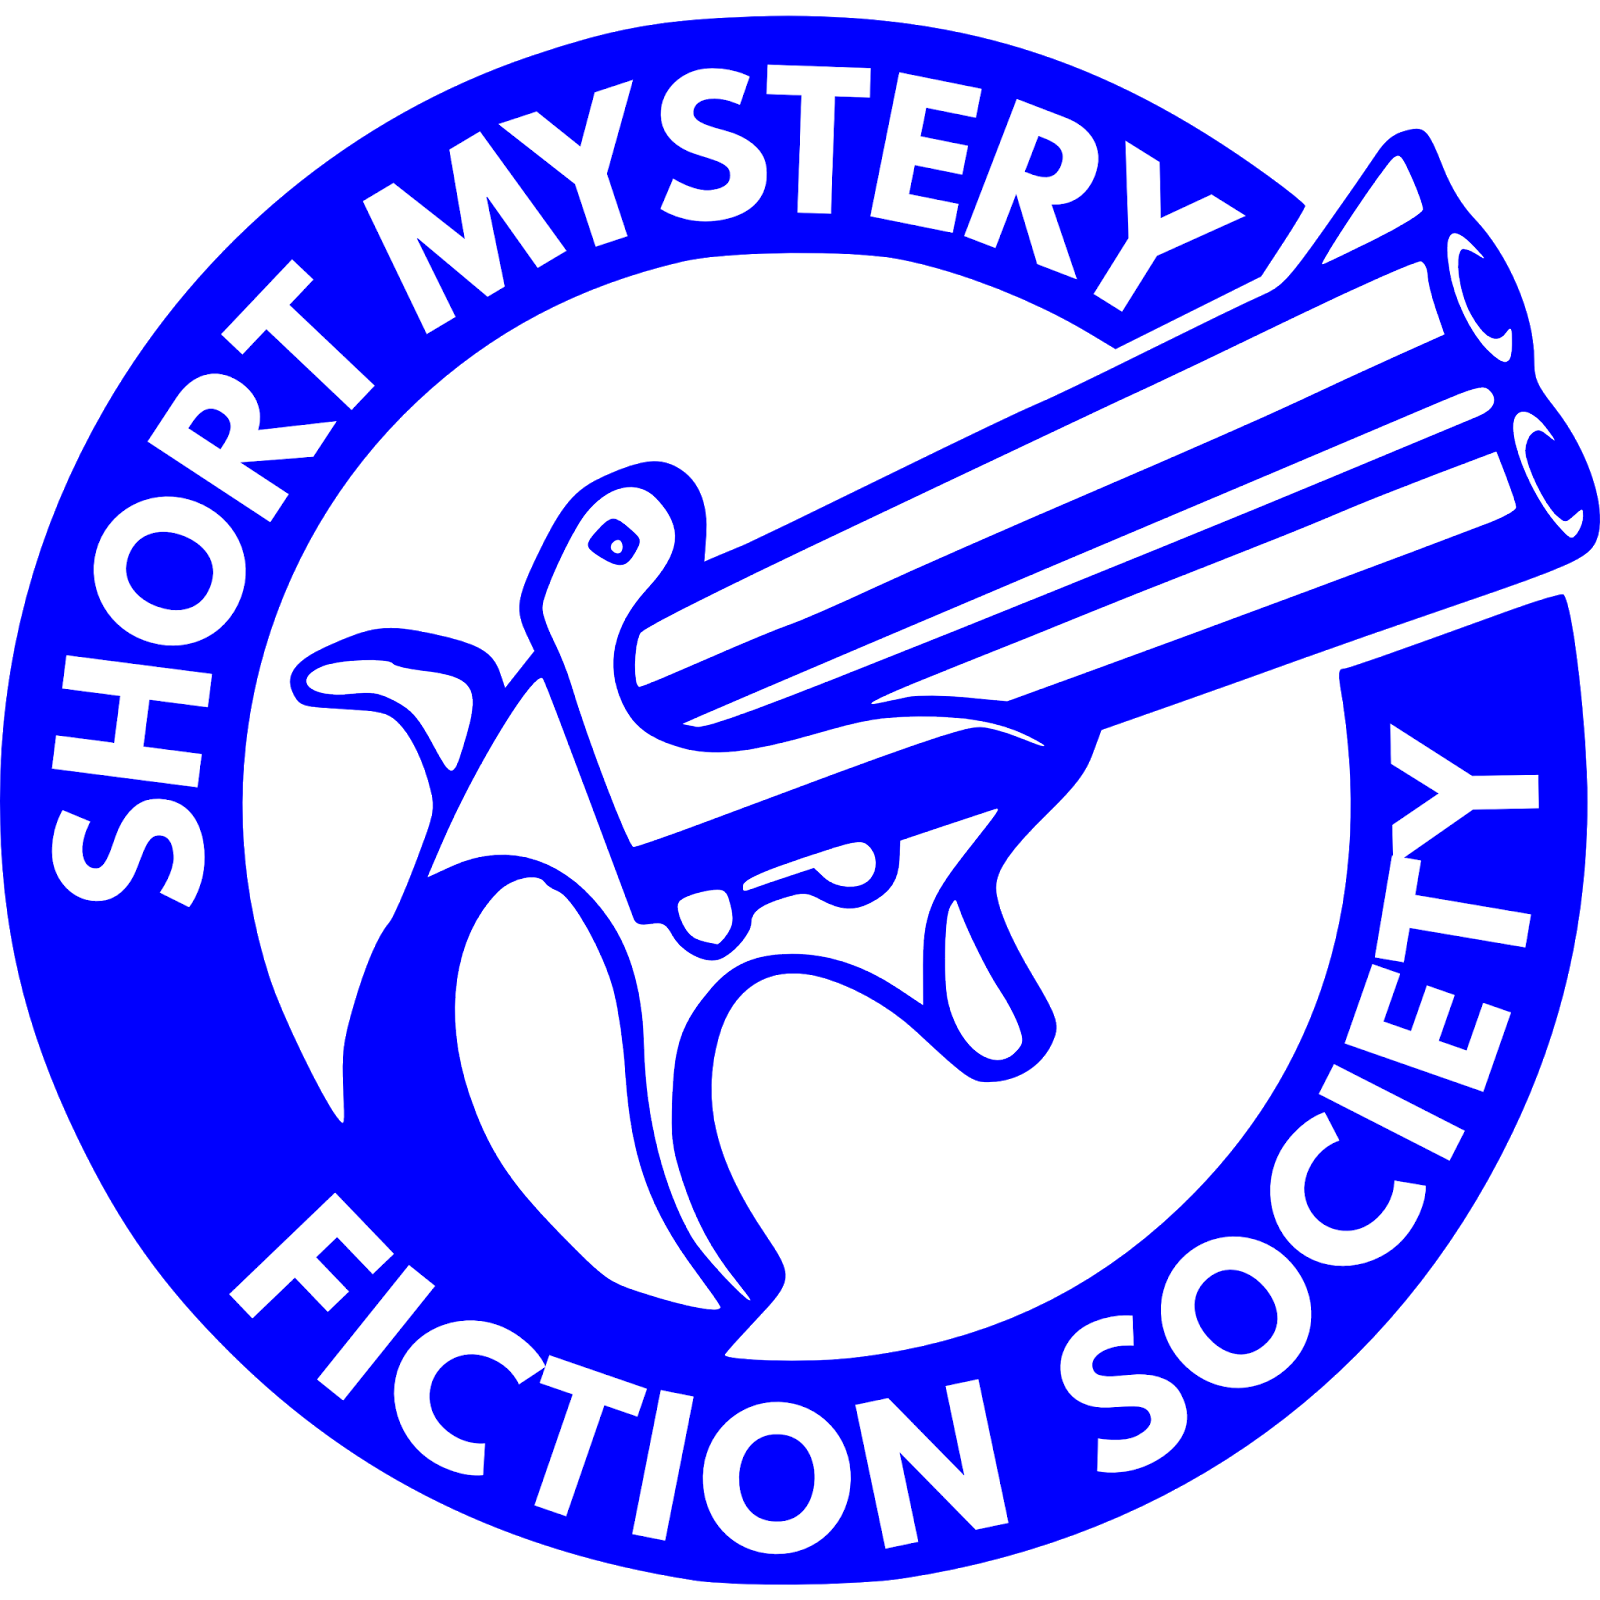 crime clipart mystery story